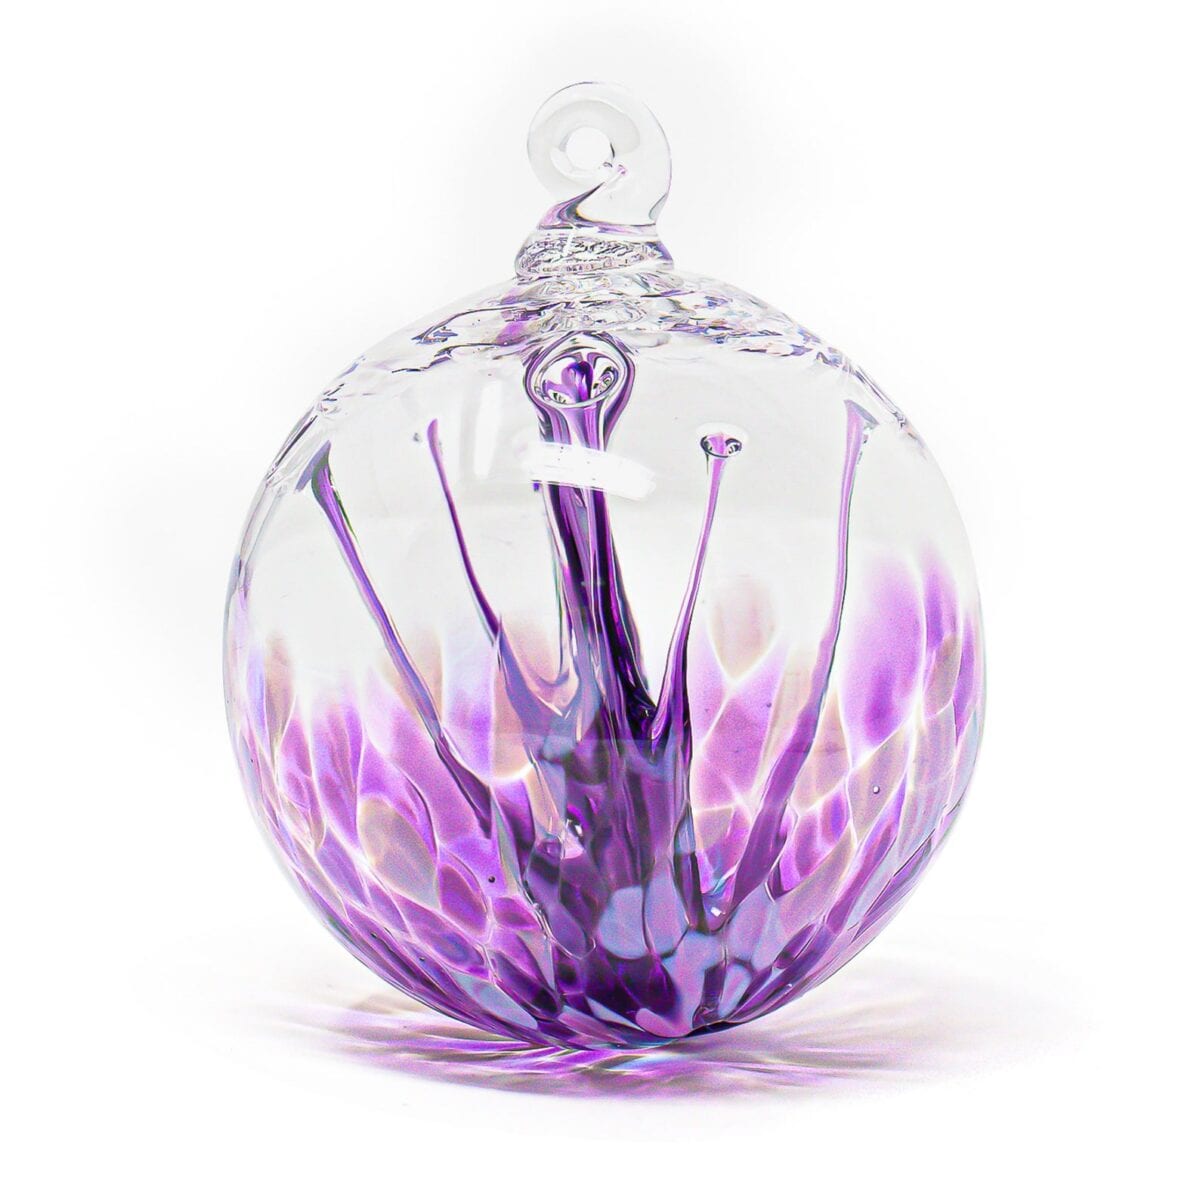 This Glass Magic Wish Ball May Just Be The Thing We Need To Make 2020